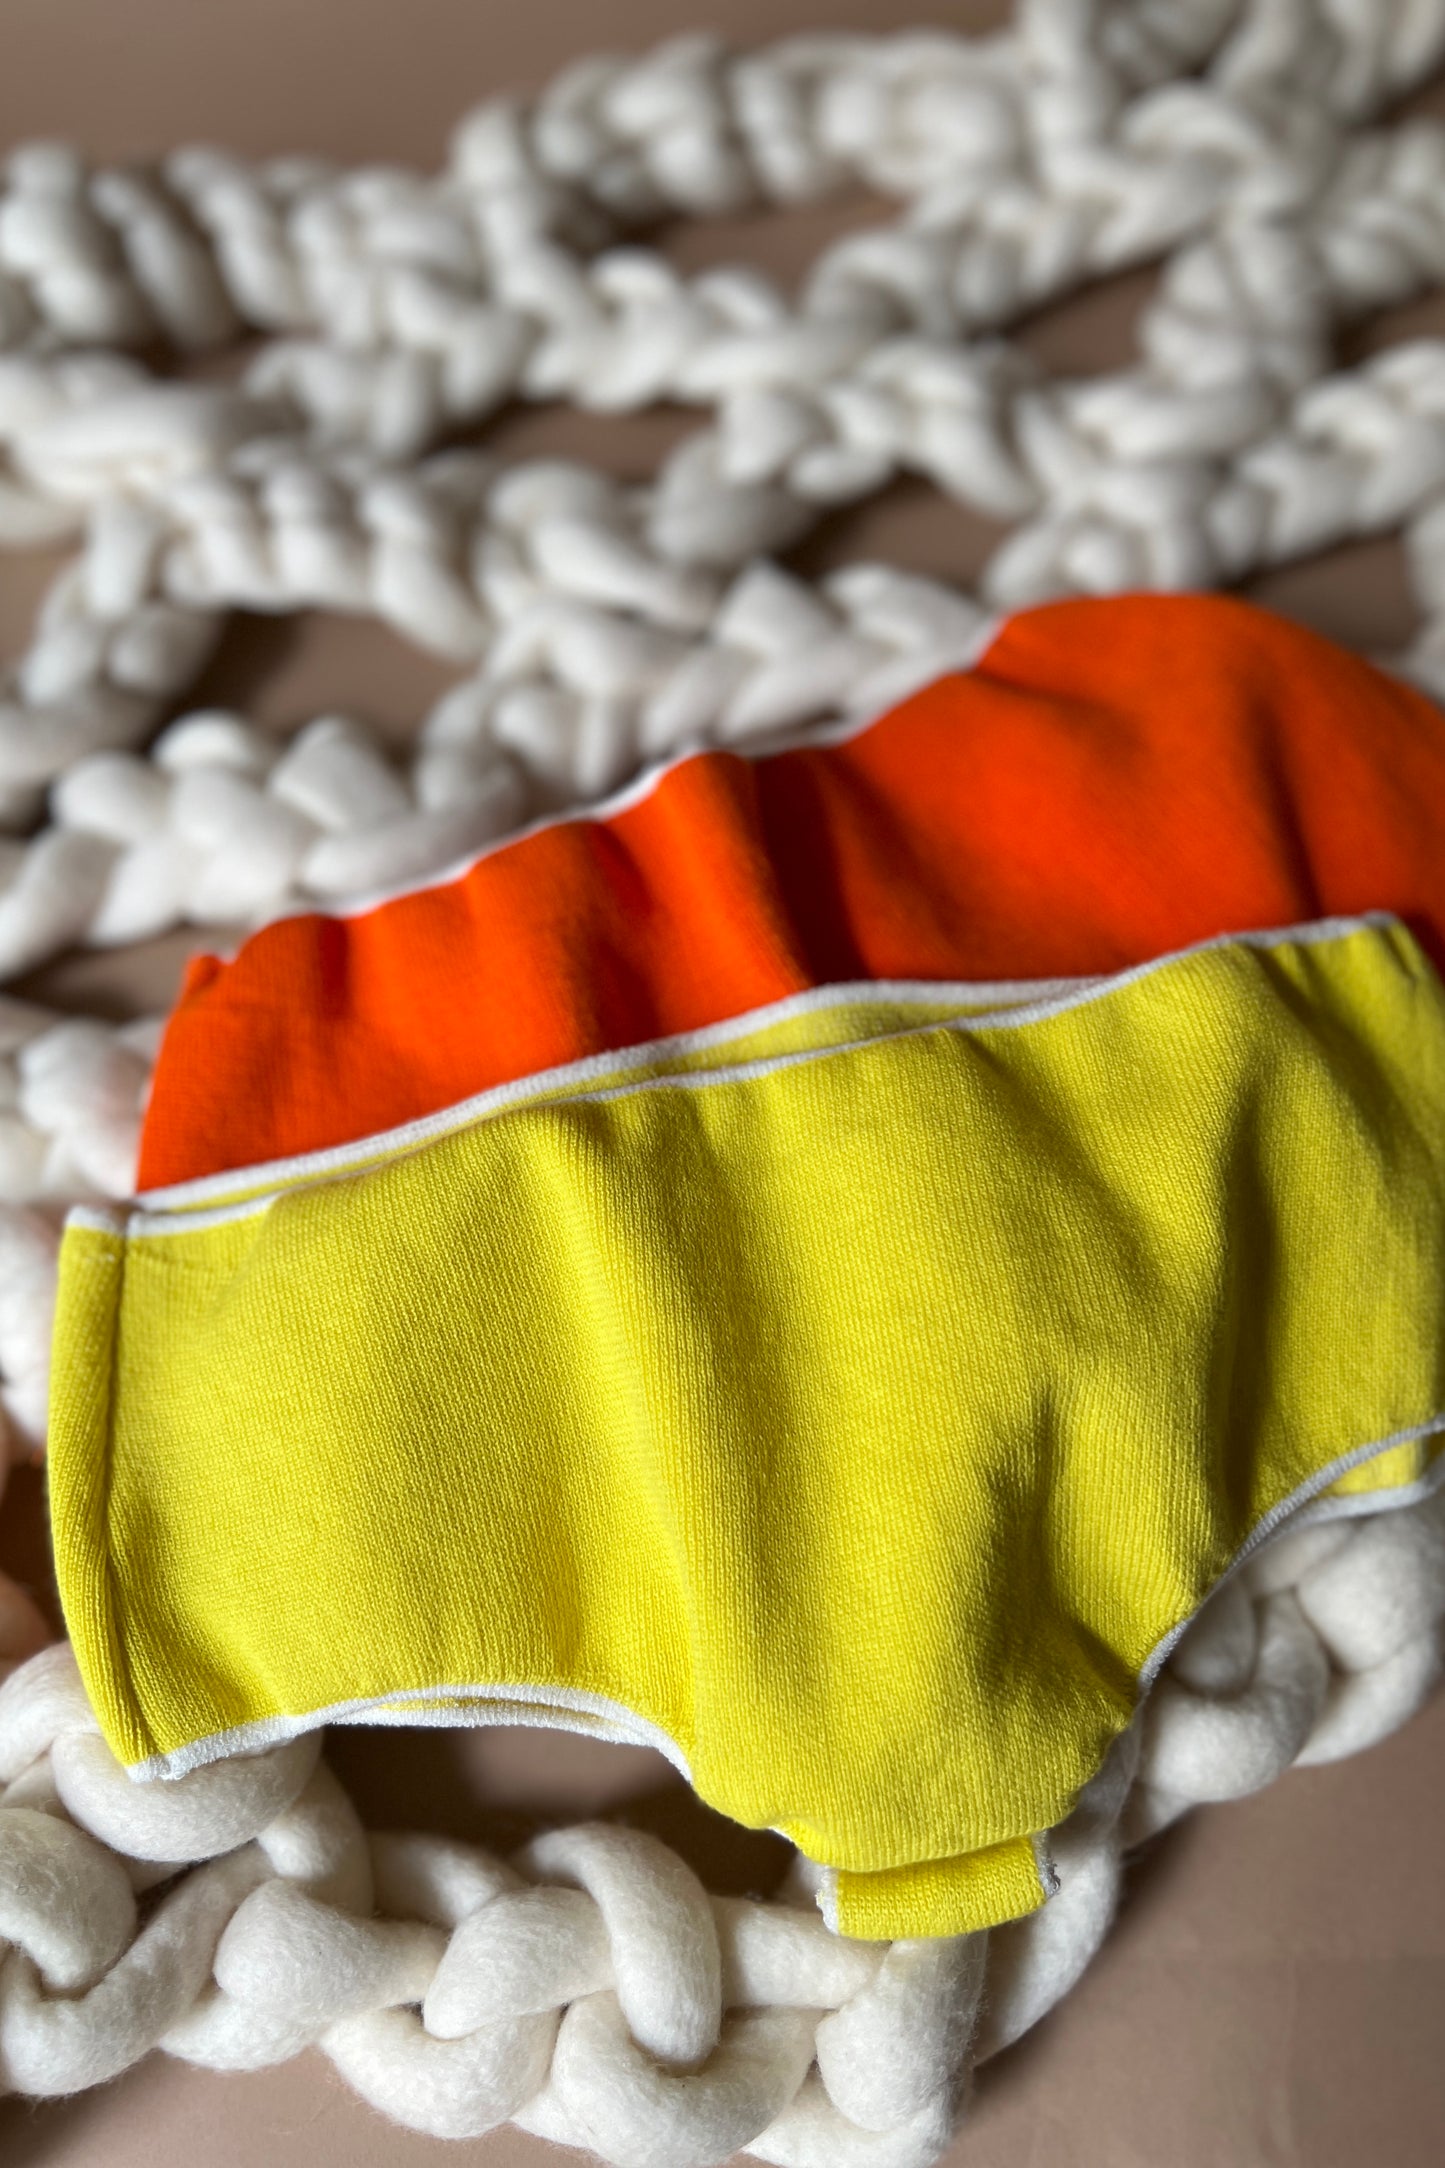 &HER neon underwear collection in safety orange and electric yellow